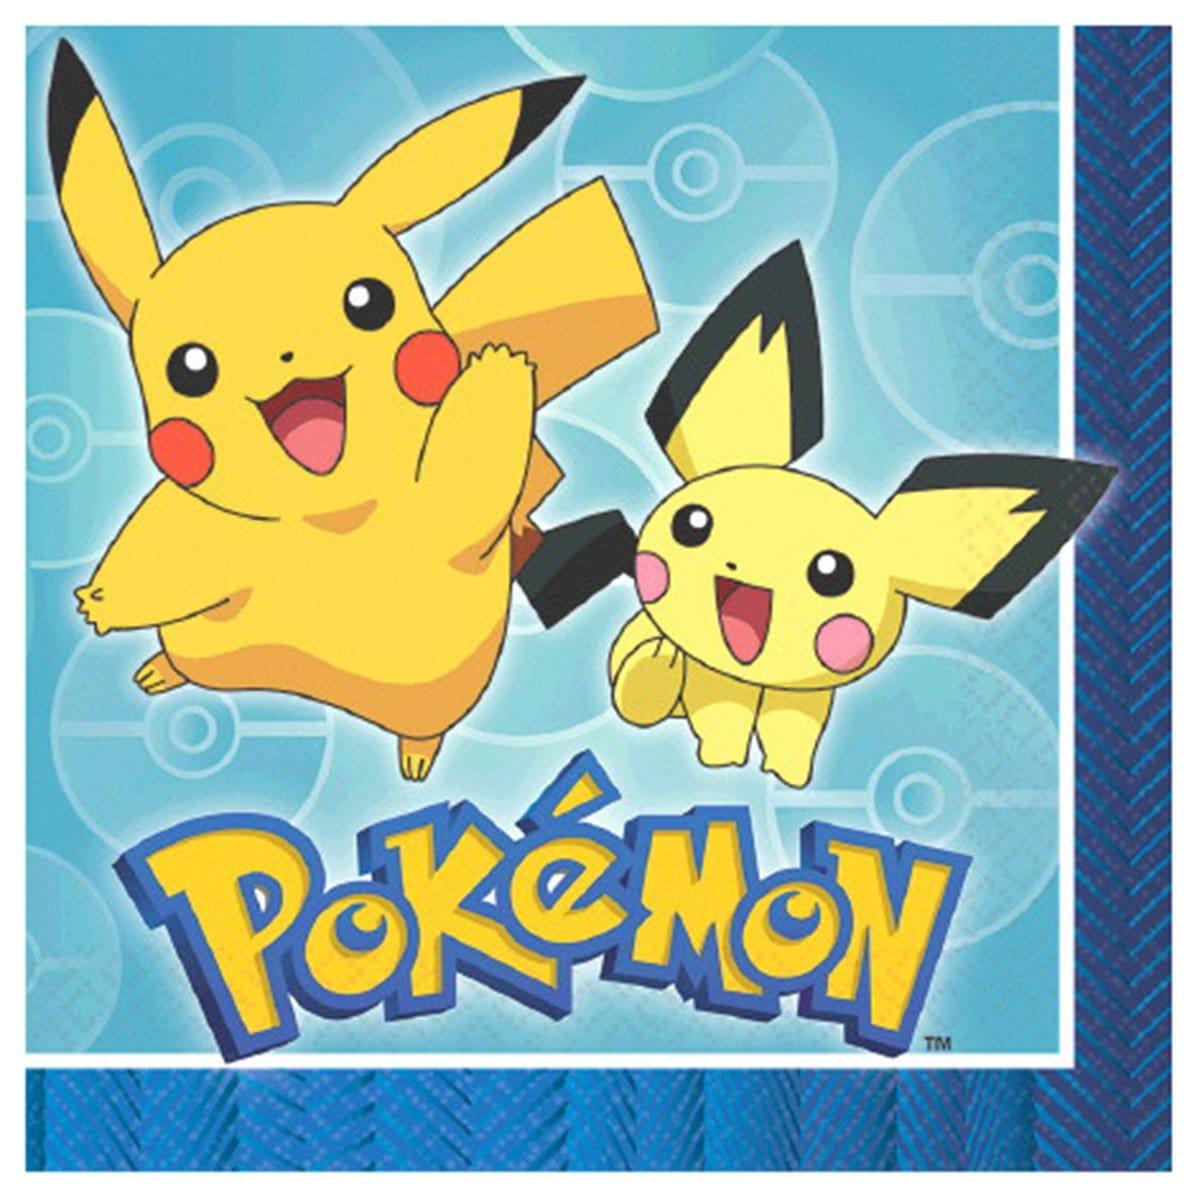 Buy Kids Birthday Pokémon lunch napkins, 16 per package sold at Party Expert